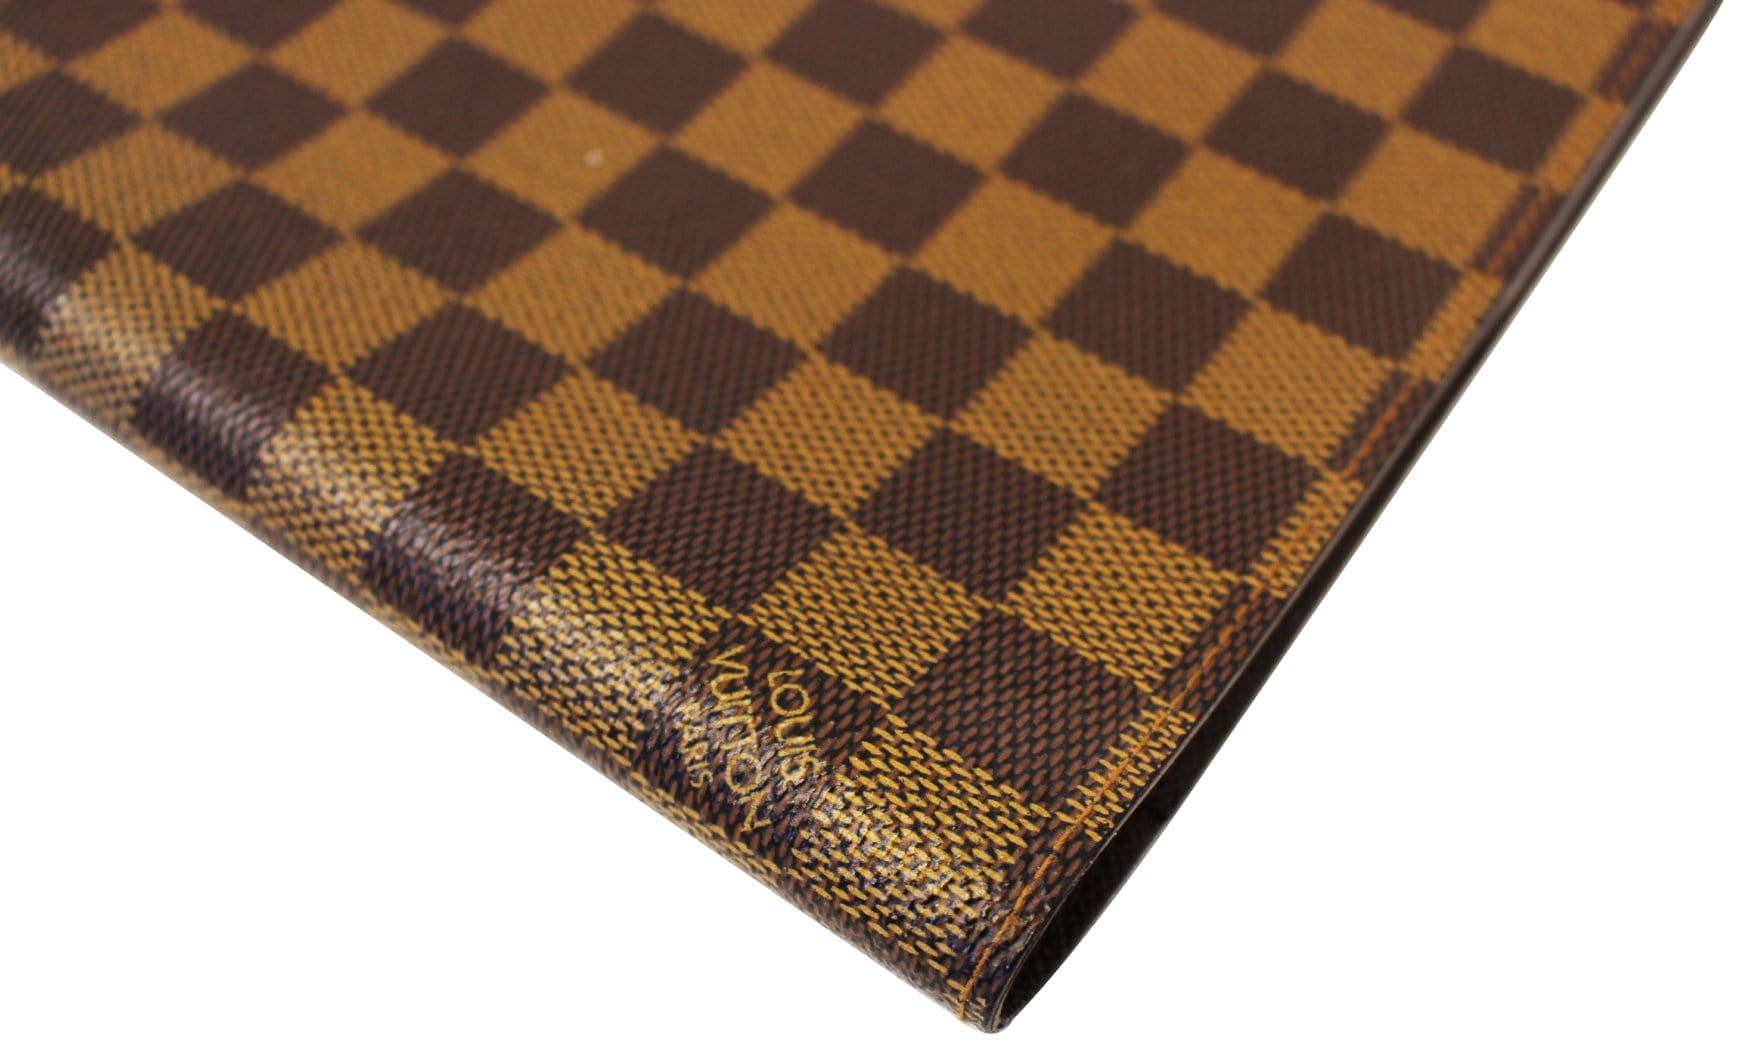 Authenticated Used Louis Vuitton Agenda PM Women's/Men's Notebook Cover  R20700 Damier Ebene (Brown) 